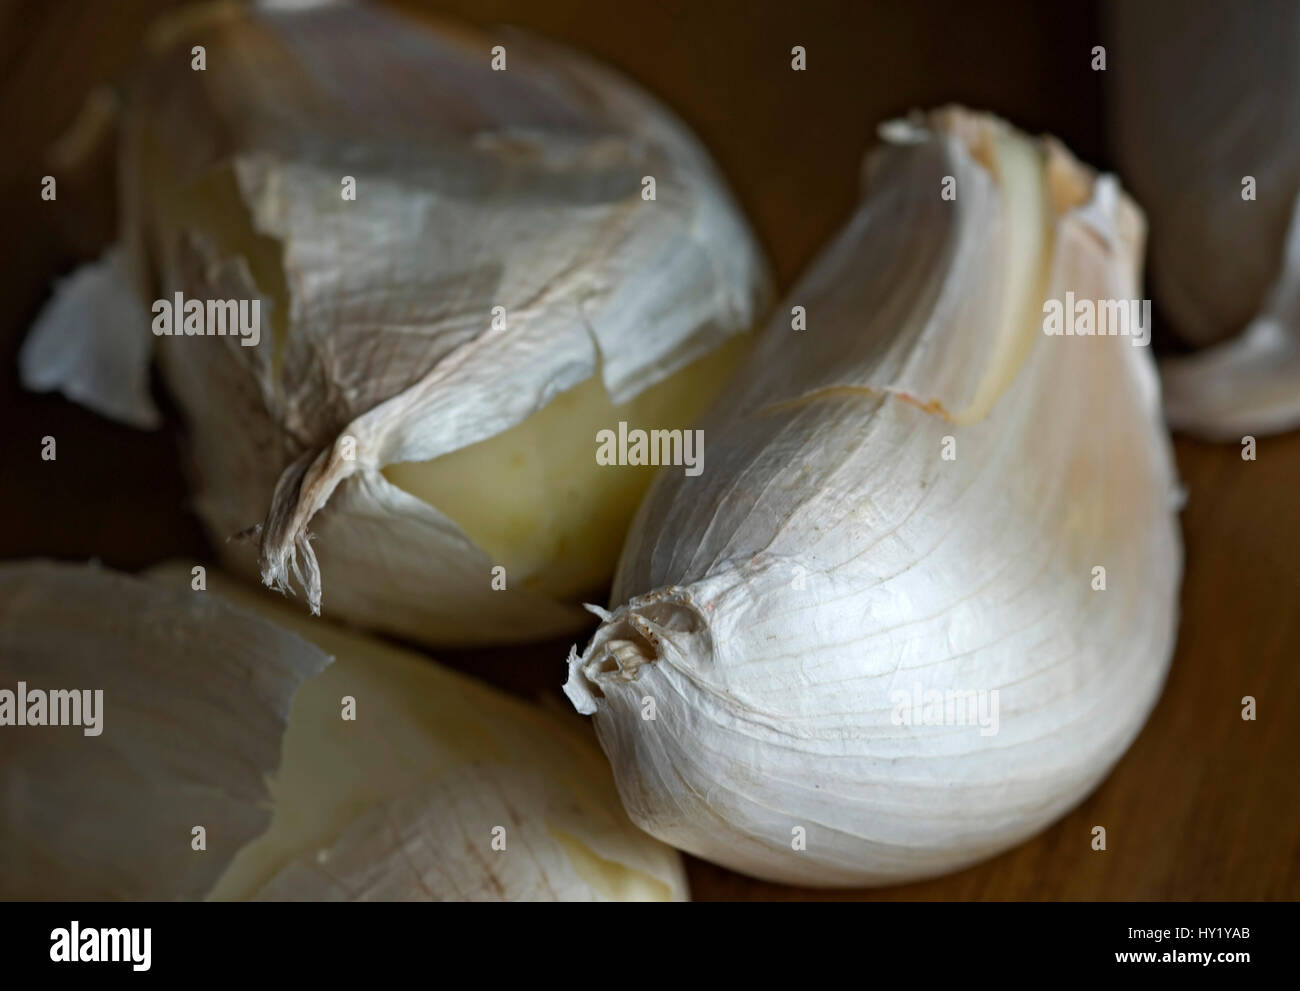 This stock photo shows a close up of Garlic gloves on a dark background. This image shows also the fine structure of the gloveÂ´s fine skin. Stock Photo